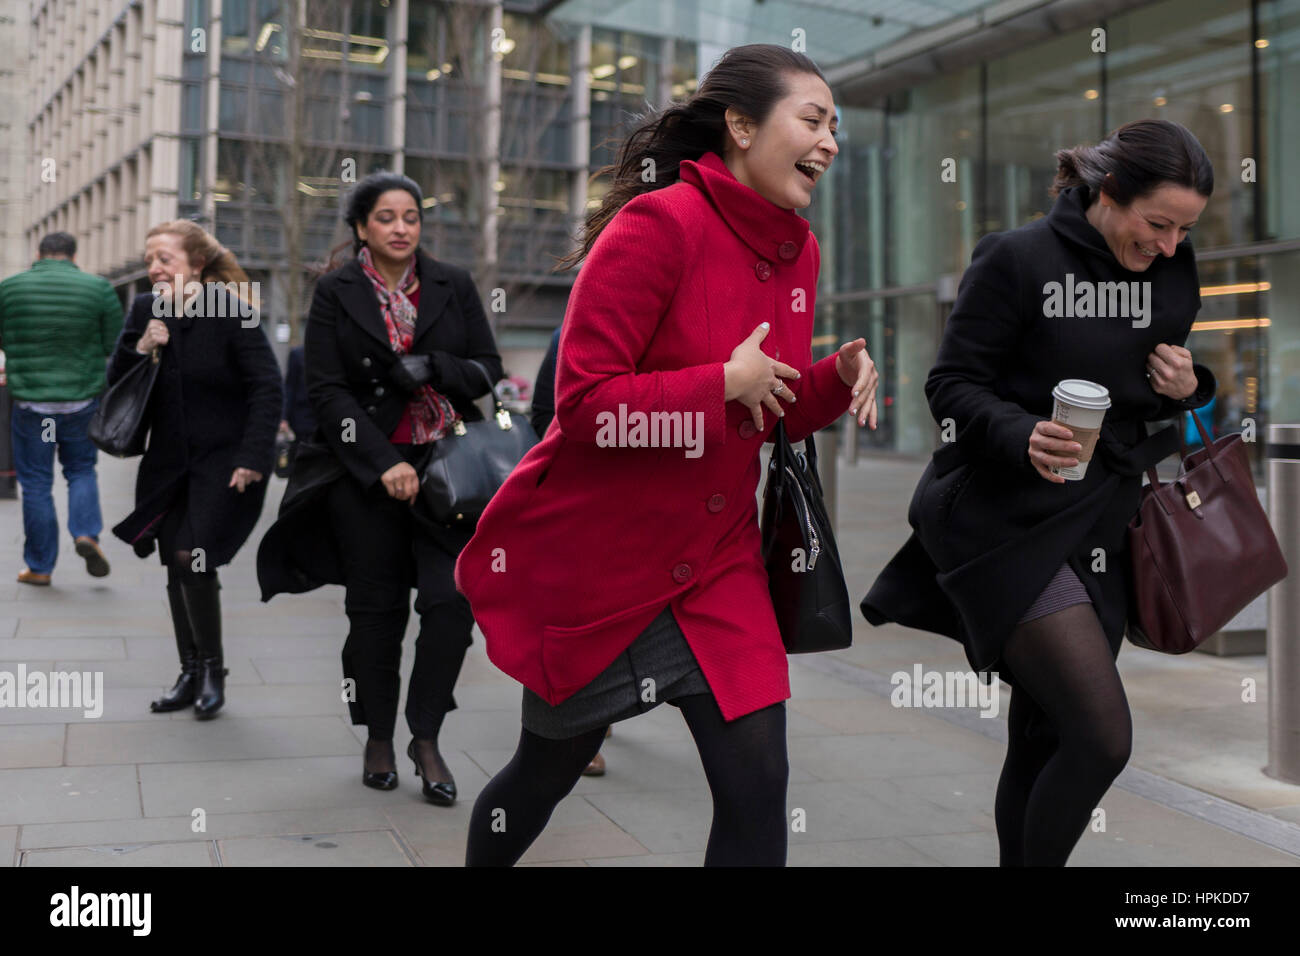 London, UK. 23rd Feb, 2017. London, UK. 23rd February 2017. As Storm Doris blows across the UK, pedestrians on Fenchurch Street, brave the high winds funneled through the narrow streets, squeezed between the tall buildings of financial and insurance institutions in the City of London, on 23rd February 2017. Strong winds have led to flight cancellations and road and rail disruption across much of Britain. Thousands of homes have been left without power in Northern Ireland, Wales, Scotland and northern England. Credit: Richard Baker/Alamy Live News Stock Photo